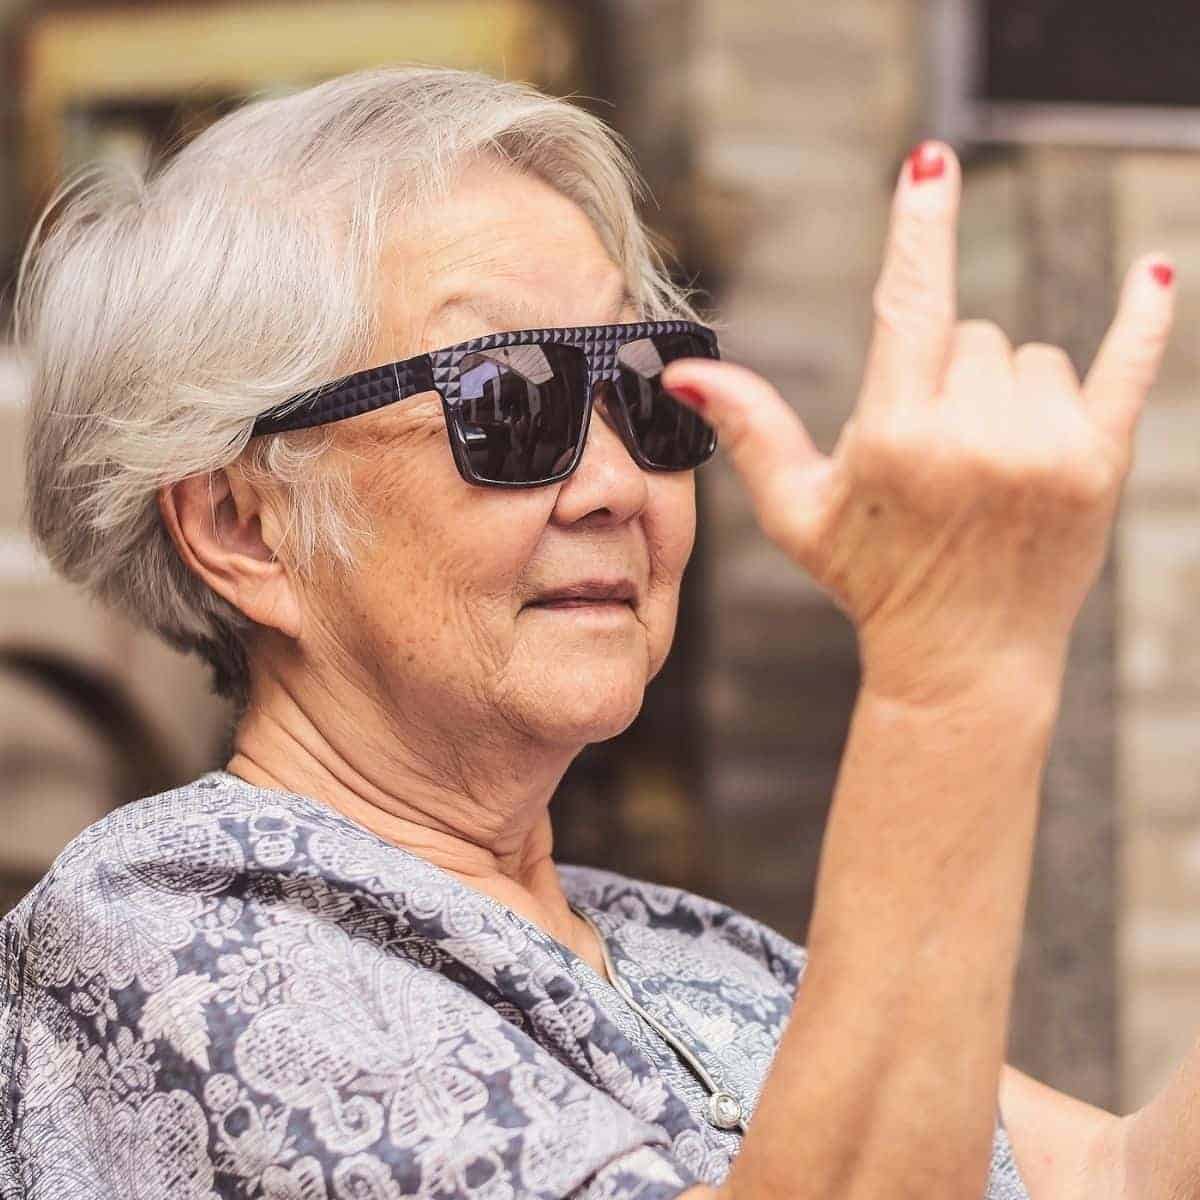 Old woman sitting down and wearing sunglasses with her hands up.